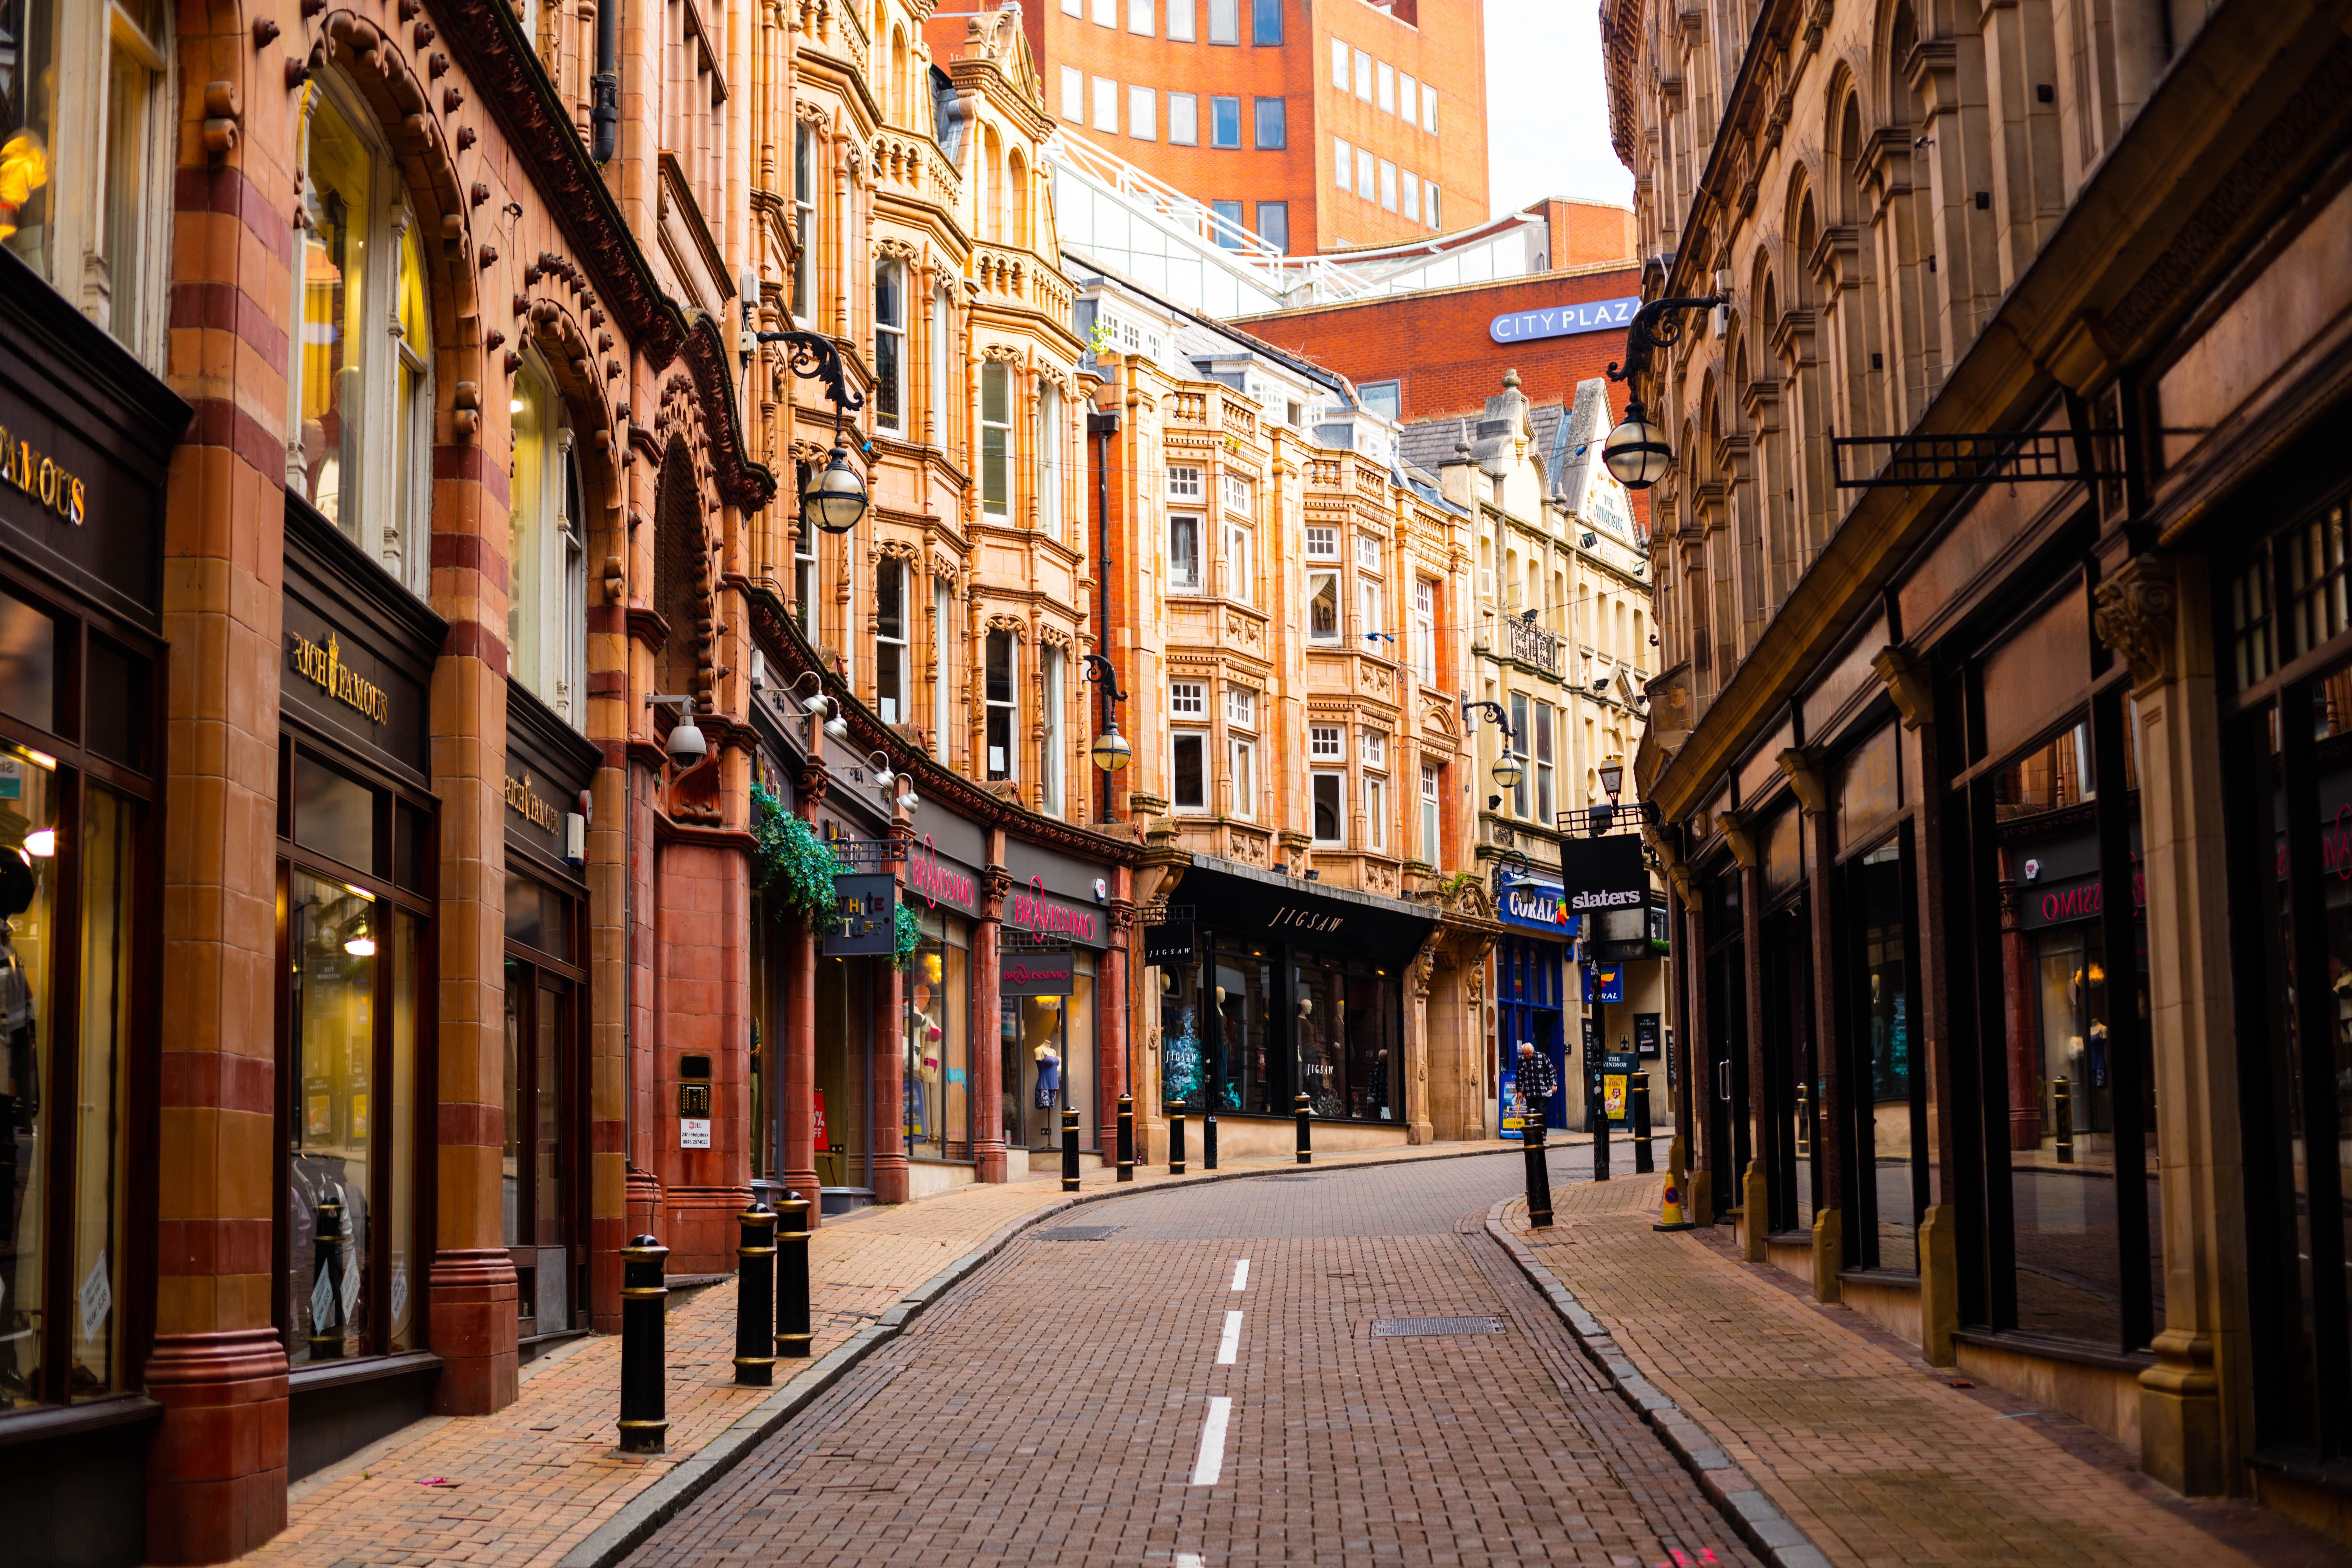 All sizes | Empty Streets of Birmingham | Flickr - Photo Sharing!